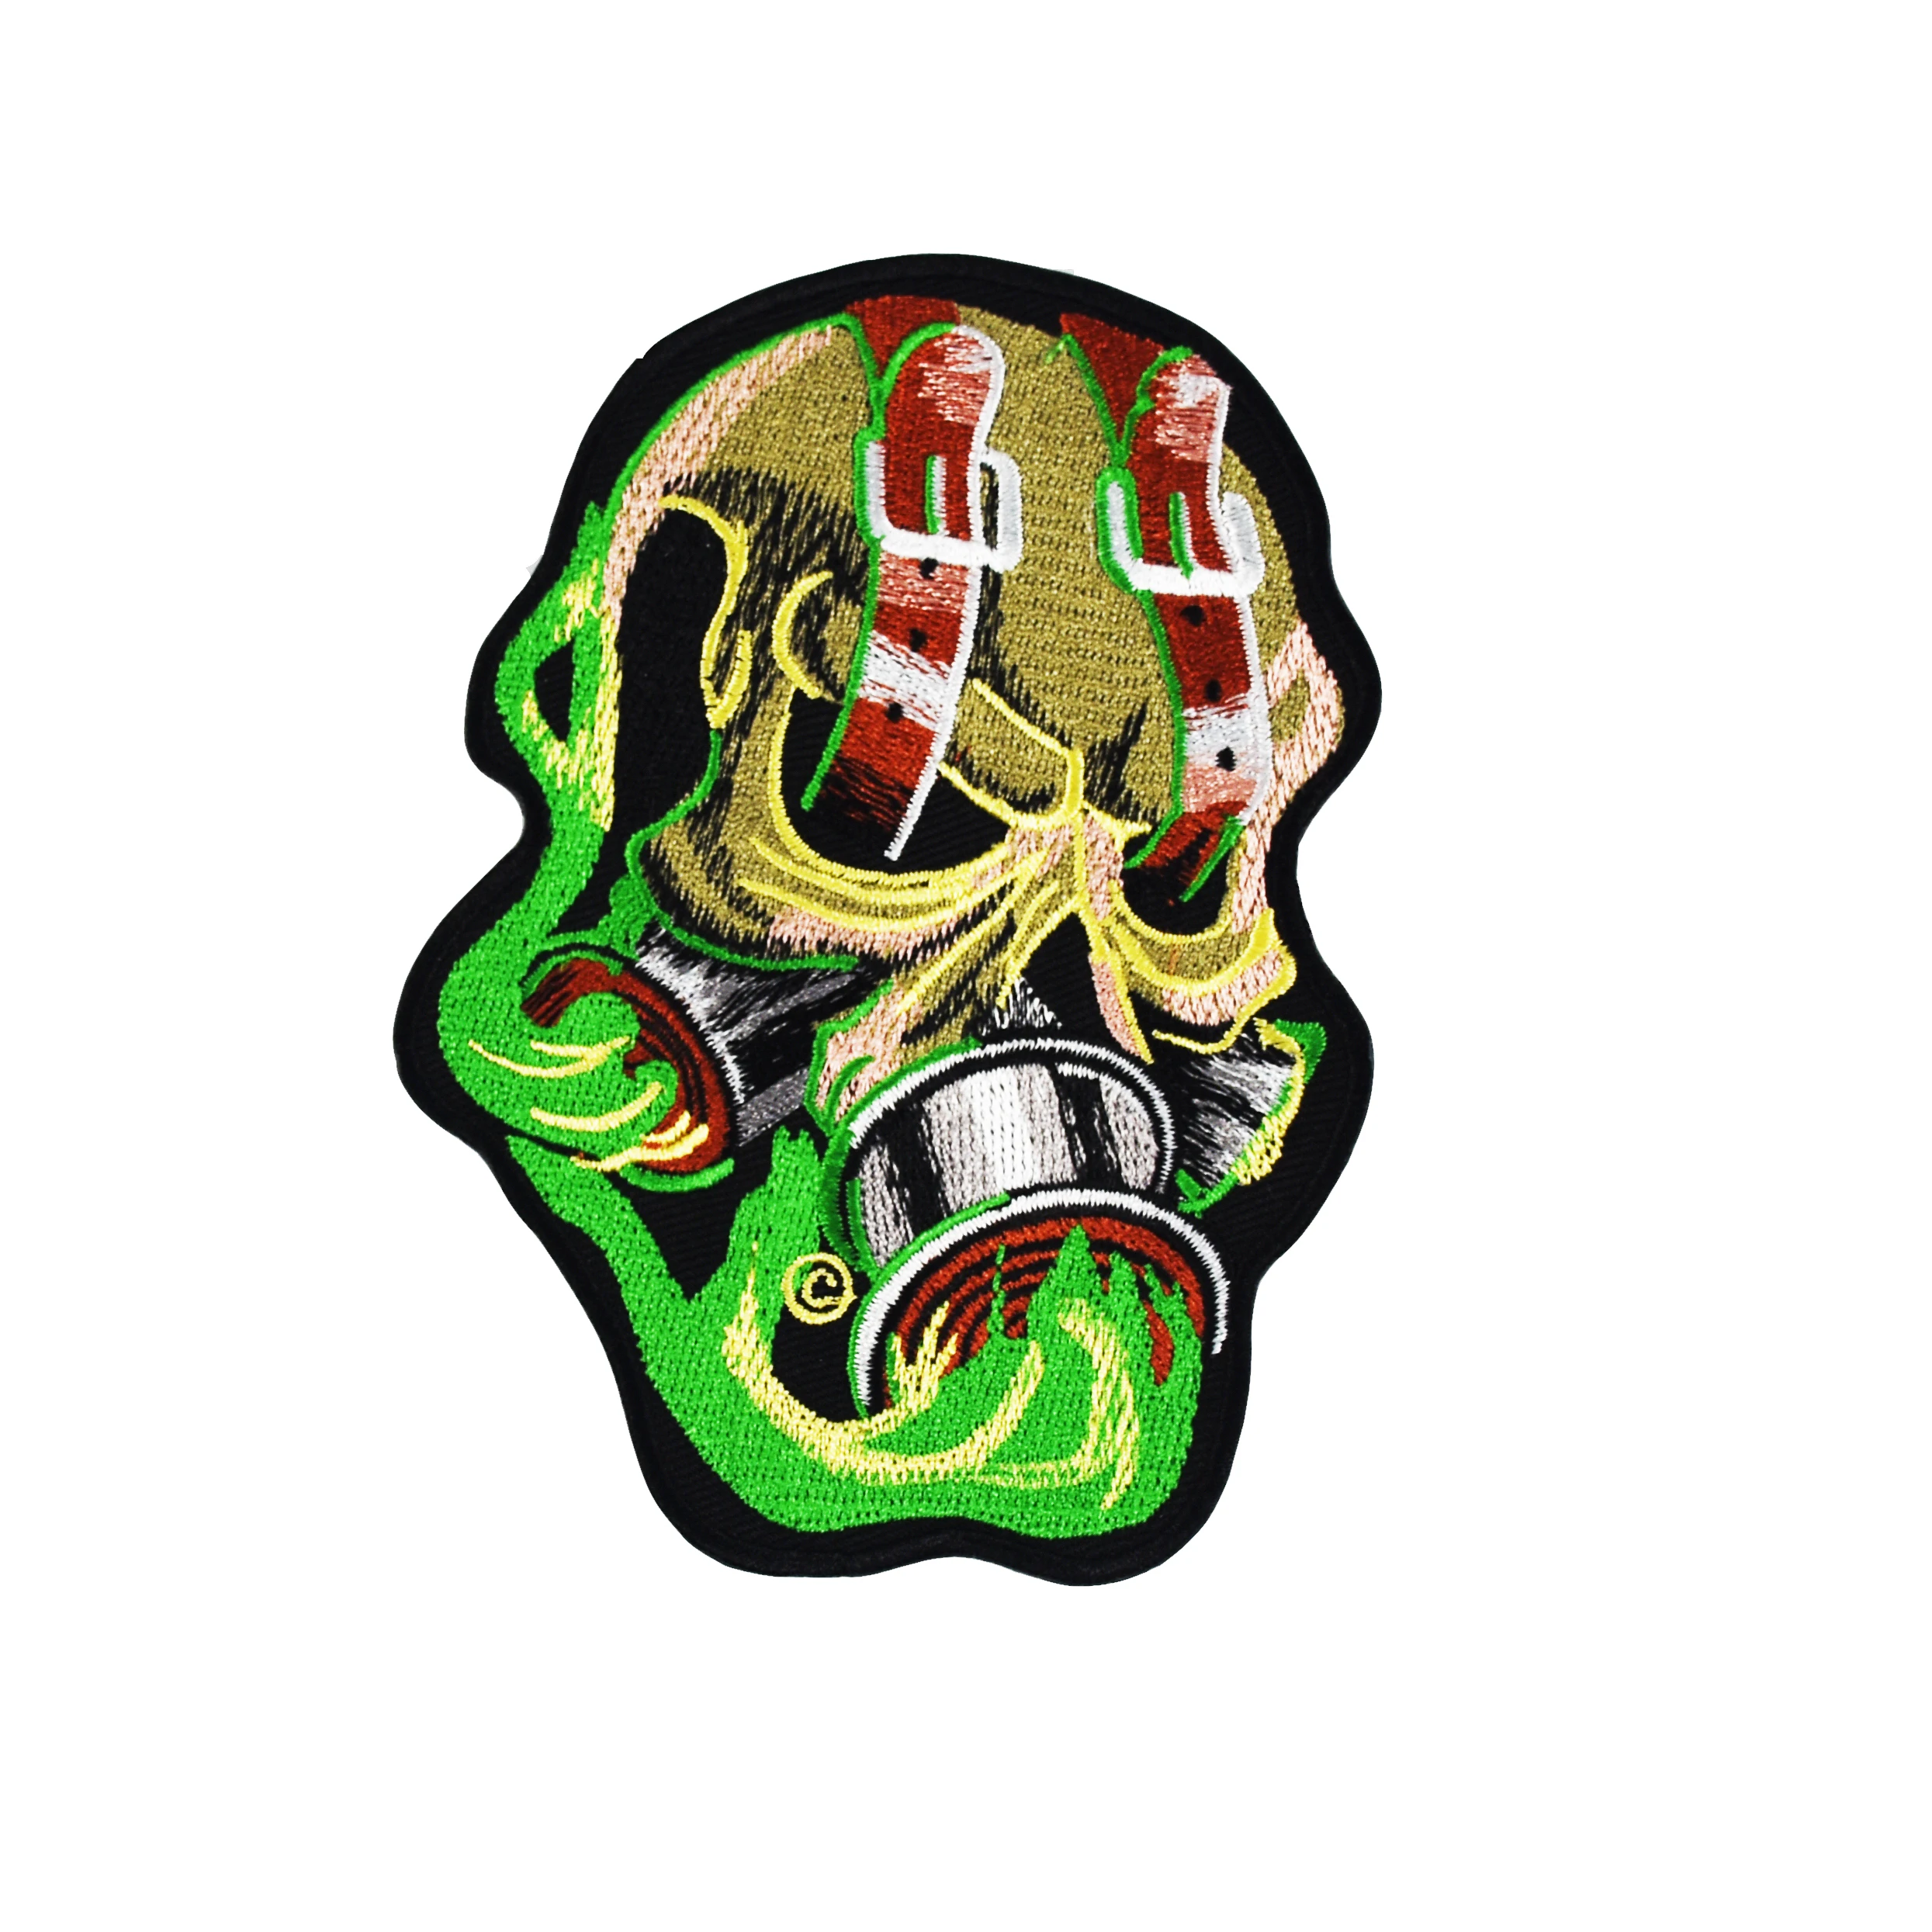 

High Quality Mask Skull Custom Embroidered Iron On Patch Biker Jacket Clothing Sew On Embroidery Patches